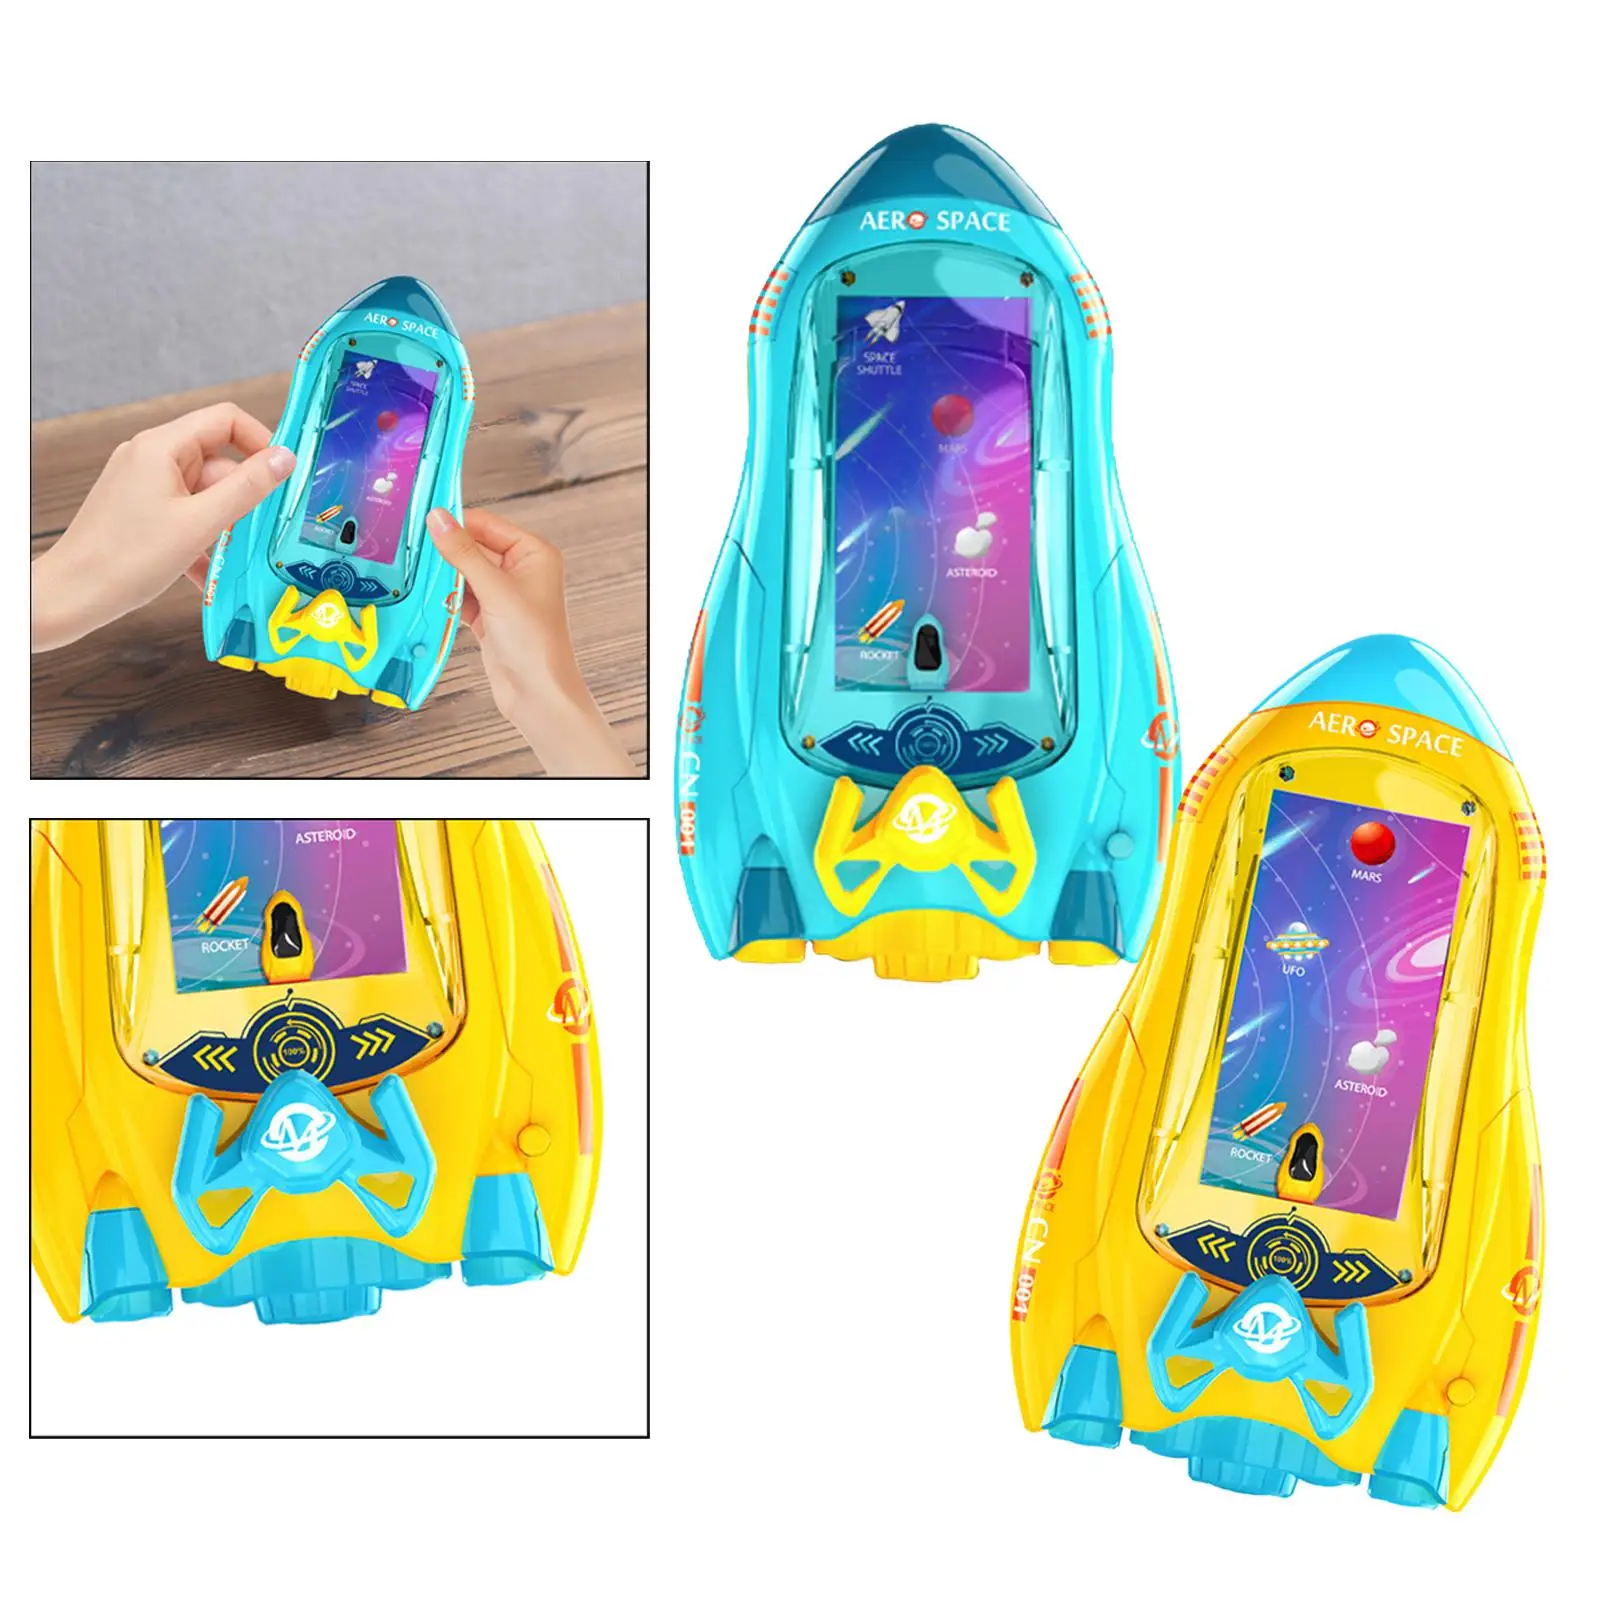 Space Adventure Game Kids Car Simulation Steering Wheel Toy with Music Pretend Play Educational Toys for Kids Boys Holiday Gifts